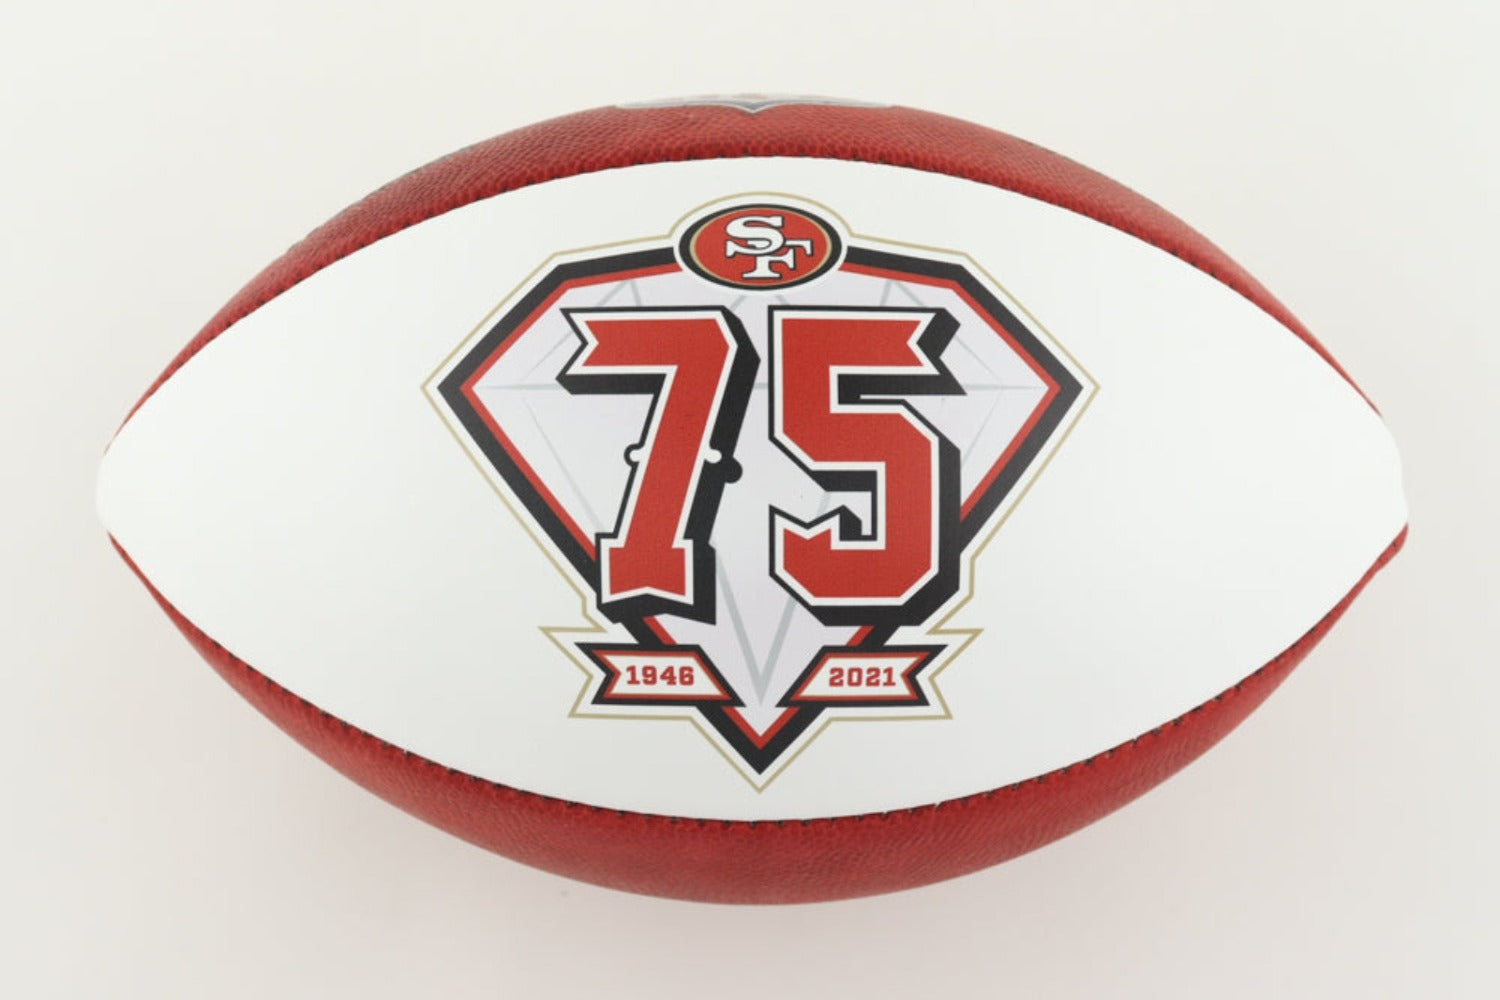 49ers Commemorative 75th Anniversary "The Duke" Official NFL Game Ball